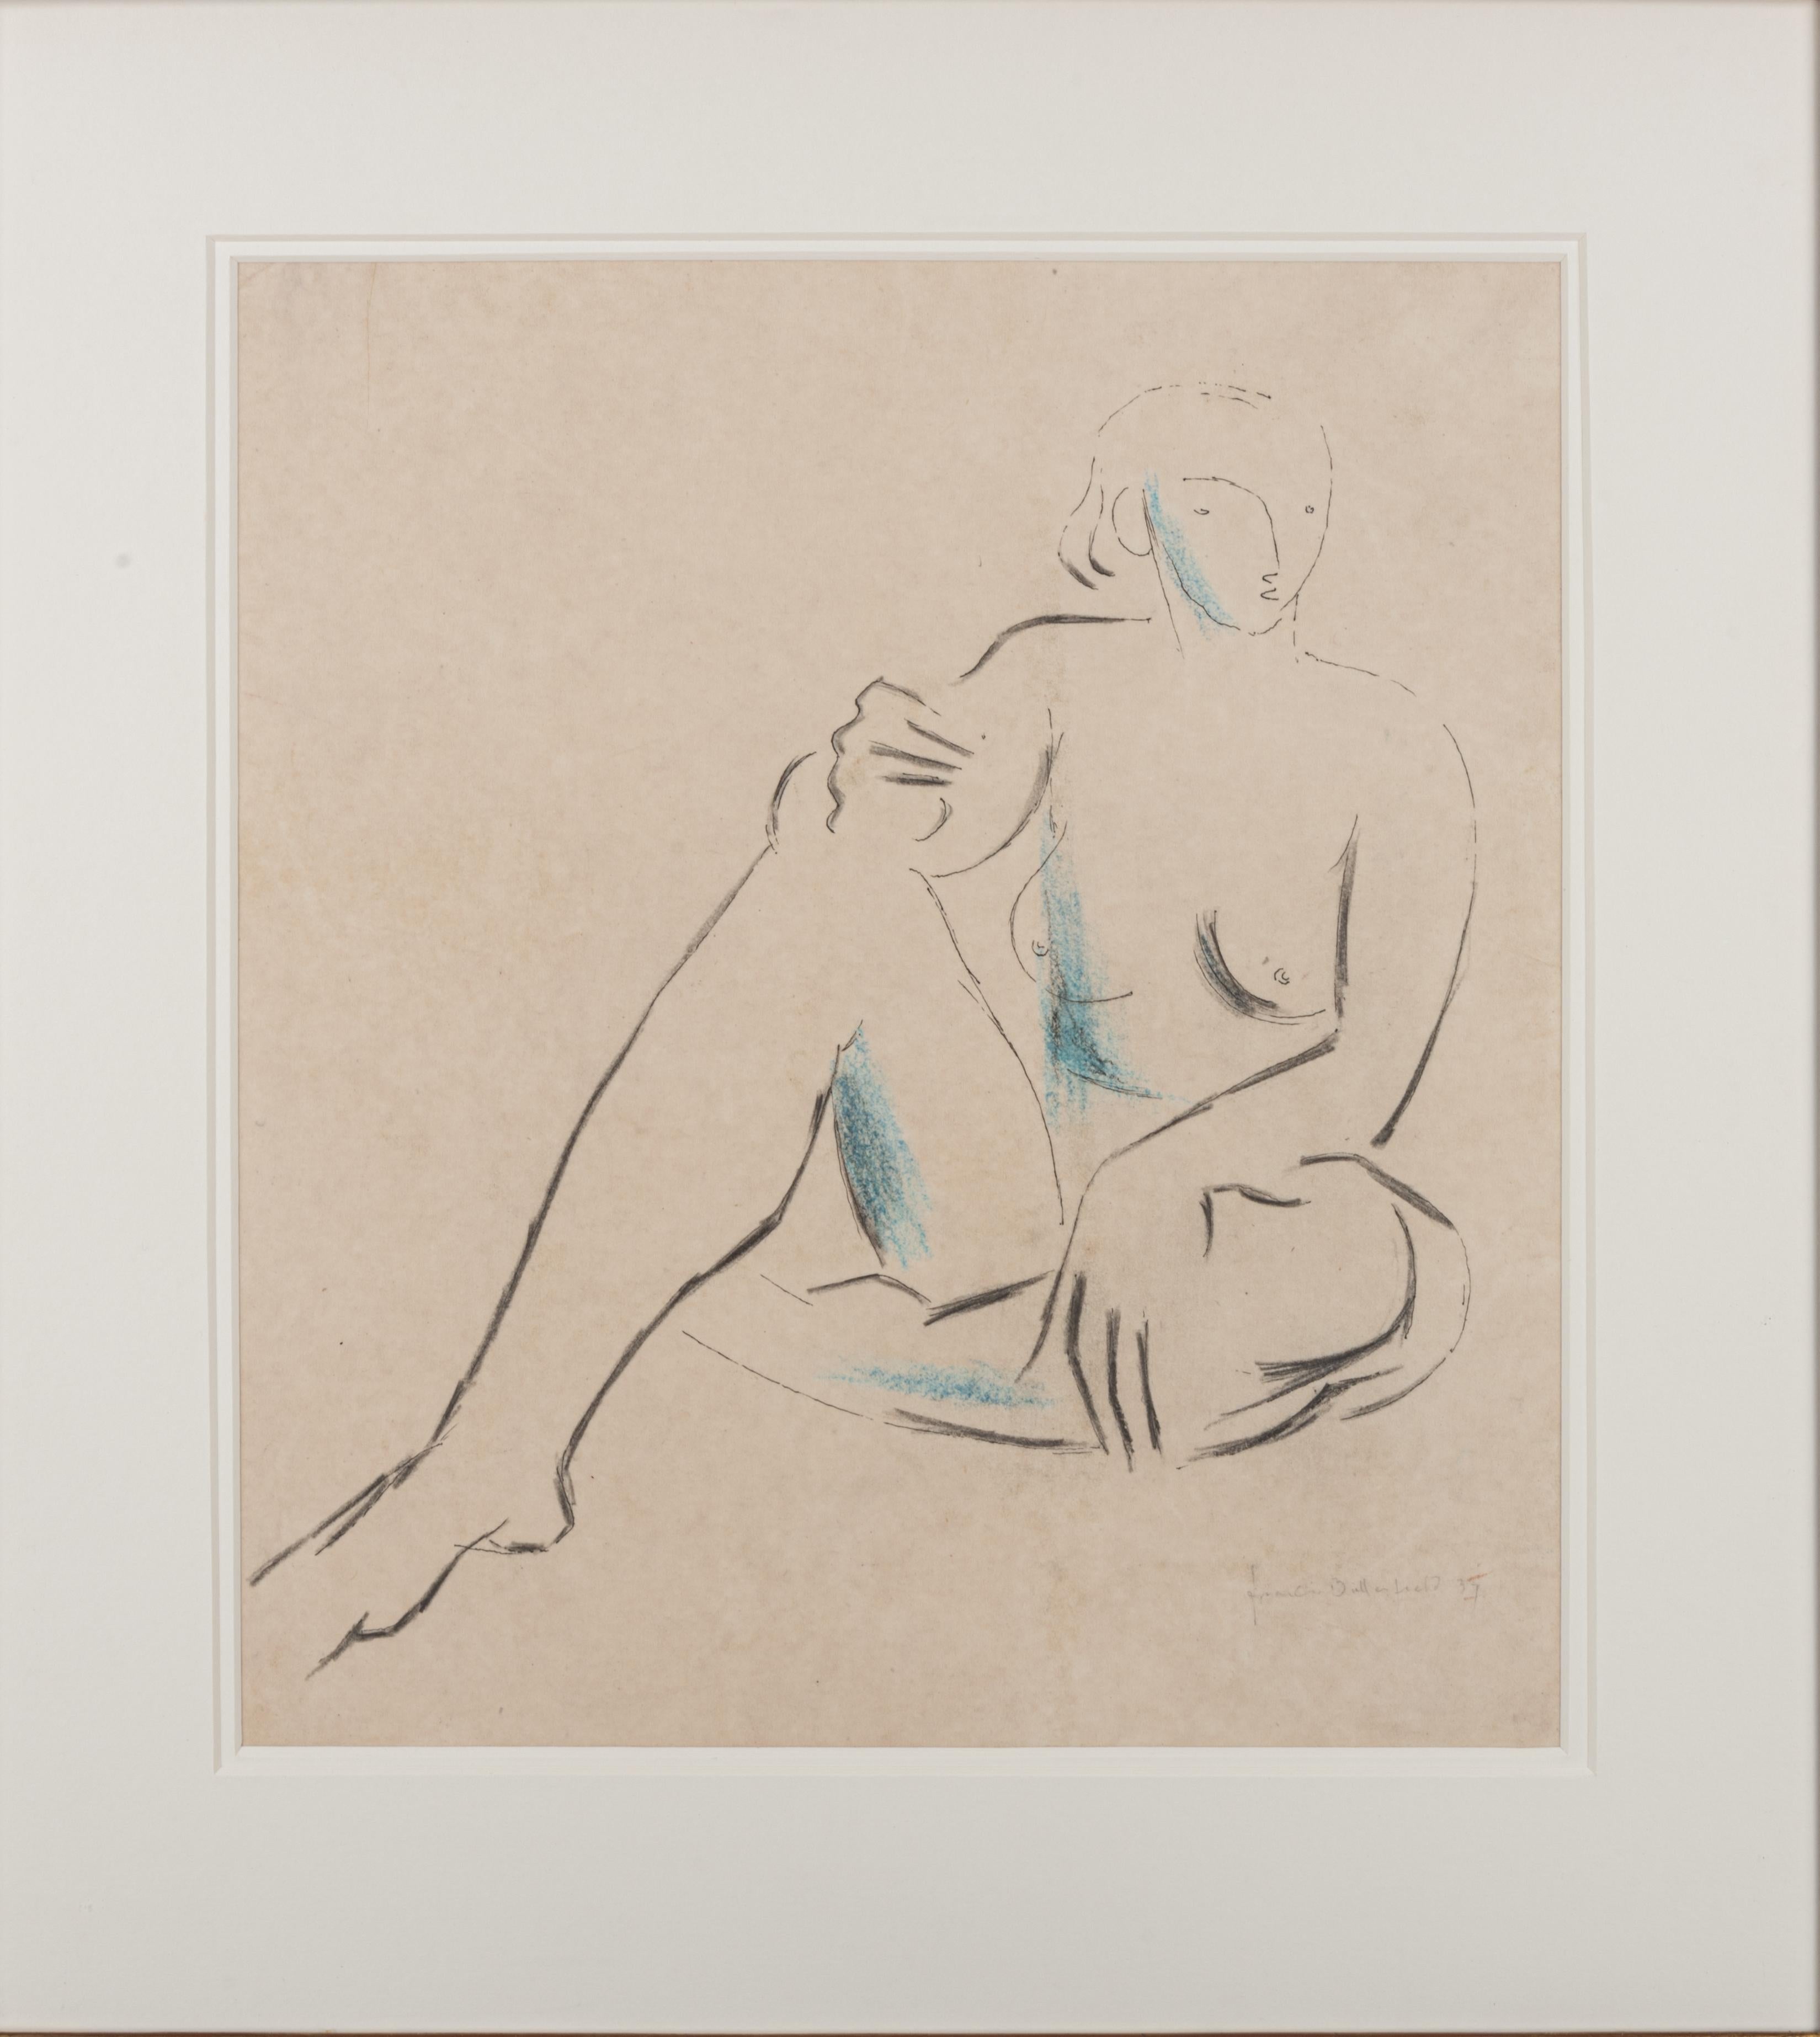 Pencil with pastel on paper
Date 1937
Marked: Francis Butterfield 37

PROVENANCE
A private collection

Frame height 55 cm
Frame width 50 cm

A drawing with pastel of a seated nude. Drawn during Butterfield's 'decade of success' with galleries in